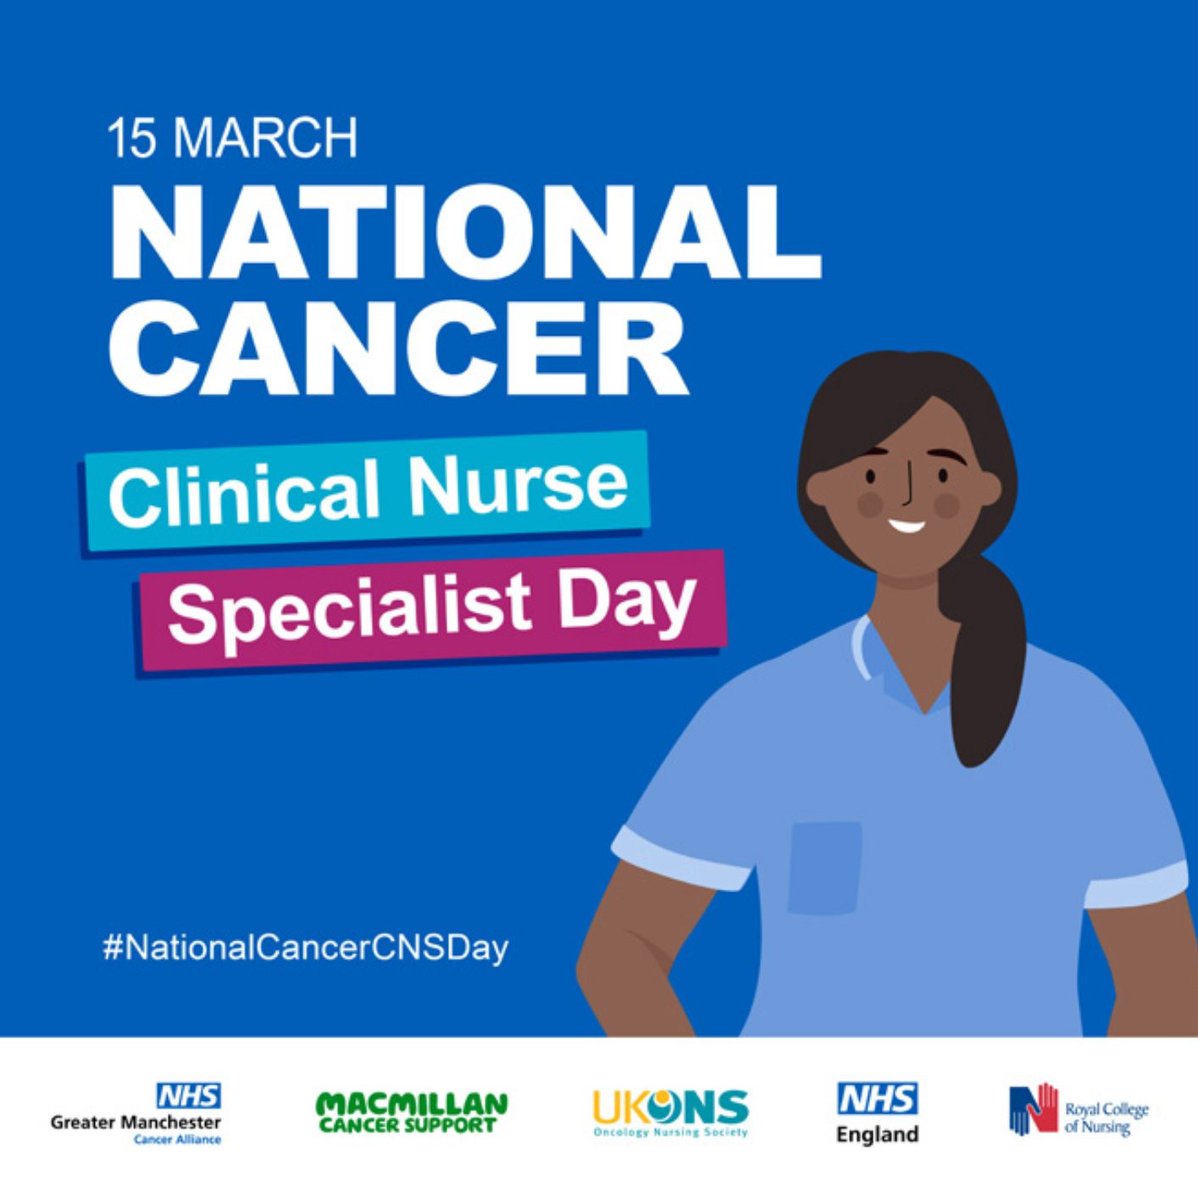 Happy National Cancer CNS Day! 🎉 Celebrating with Lancashire Teaching Hospitals, honouring vital Cancer Clinical Nurse Specialists (CNS) in cancer care. CNSs provide crucial support from initial contact to holistic care. 🌟 Visit Rosemere Cancer Centre for a cupcake celebration!